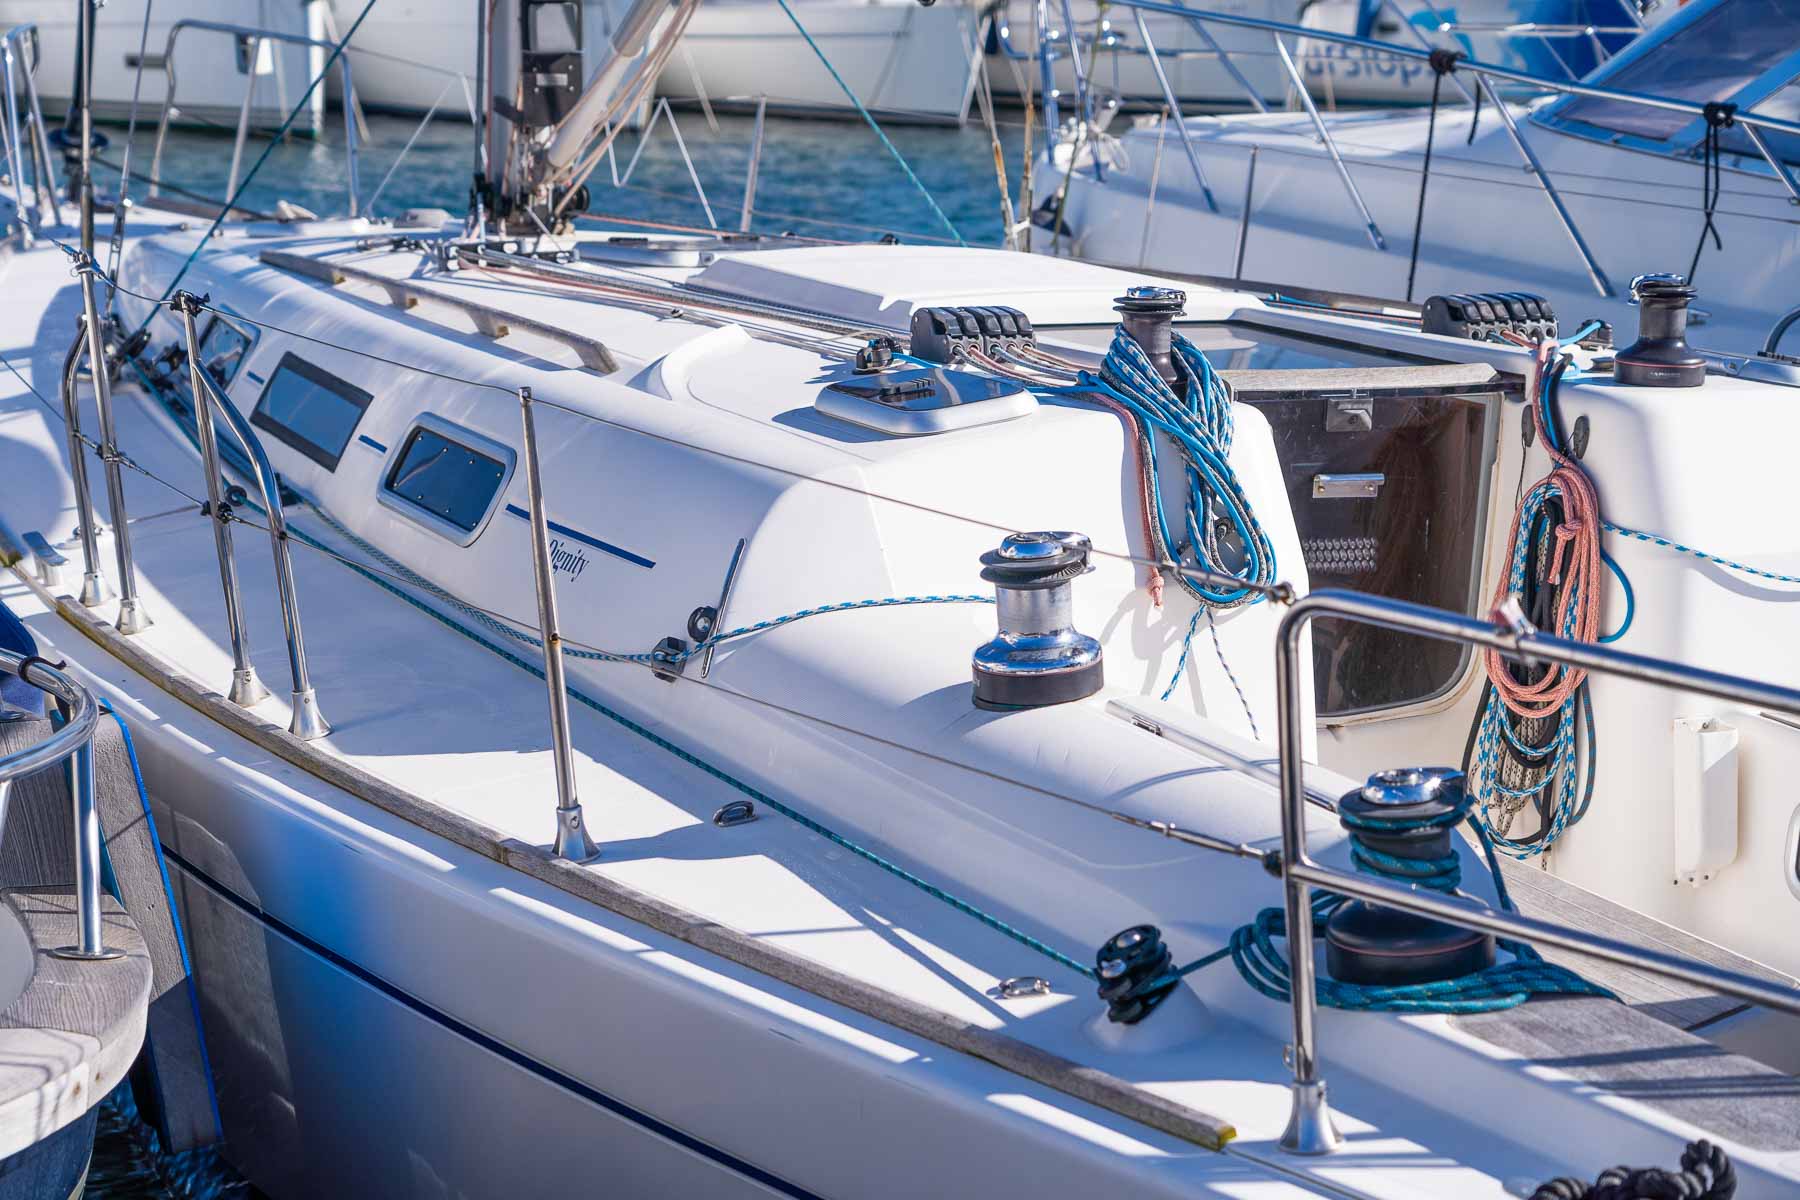 Balearic Islands leads the national boat market in the first quarter